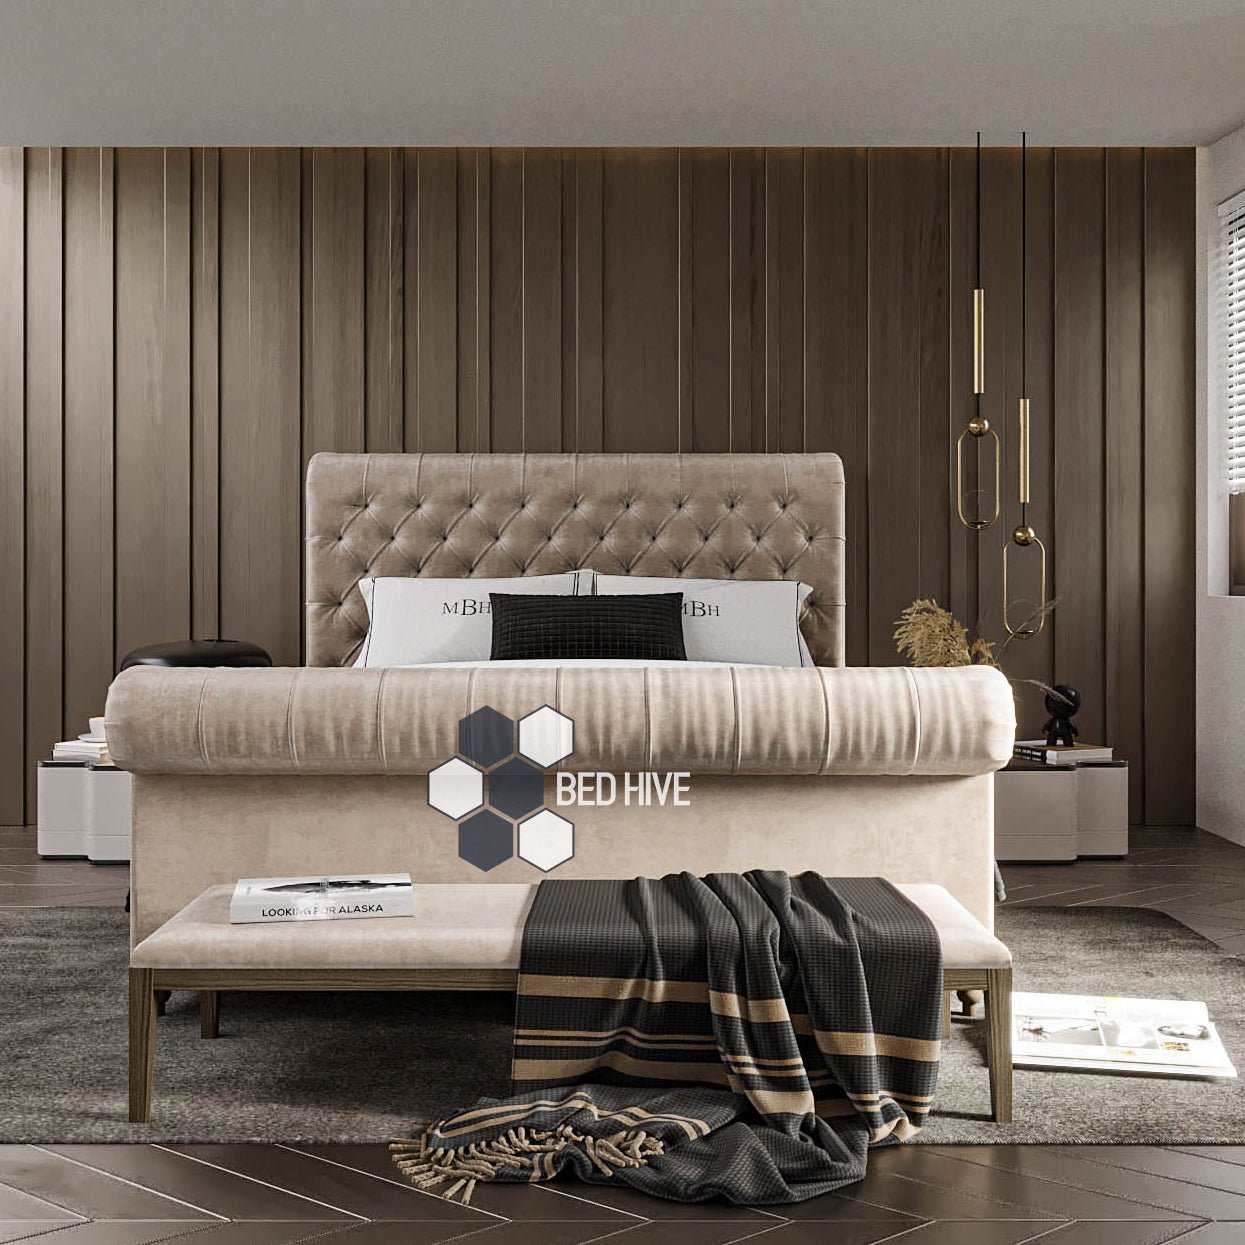 Adria Chesterfield Sleigh Bed - Bed Hive Sleigh bed, scroll sleigh bed, chesterfield bed, cream fabric bed